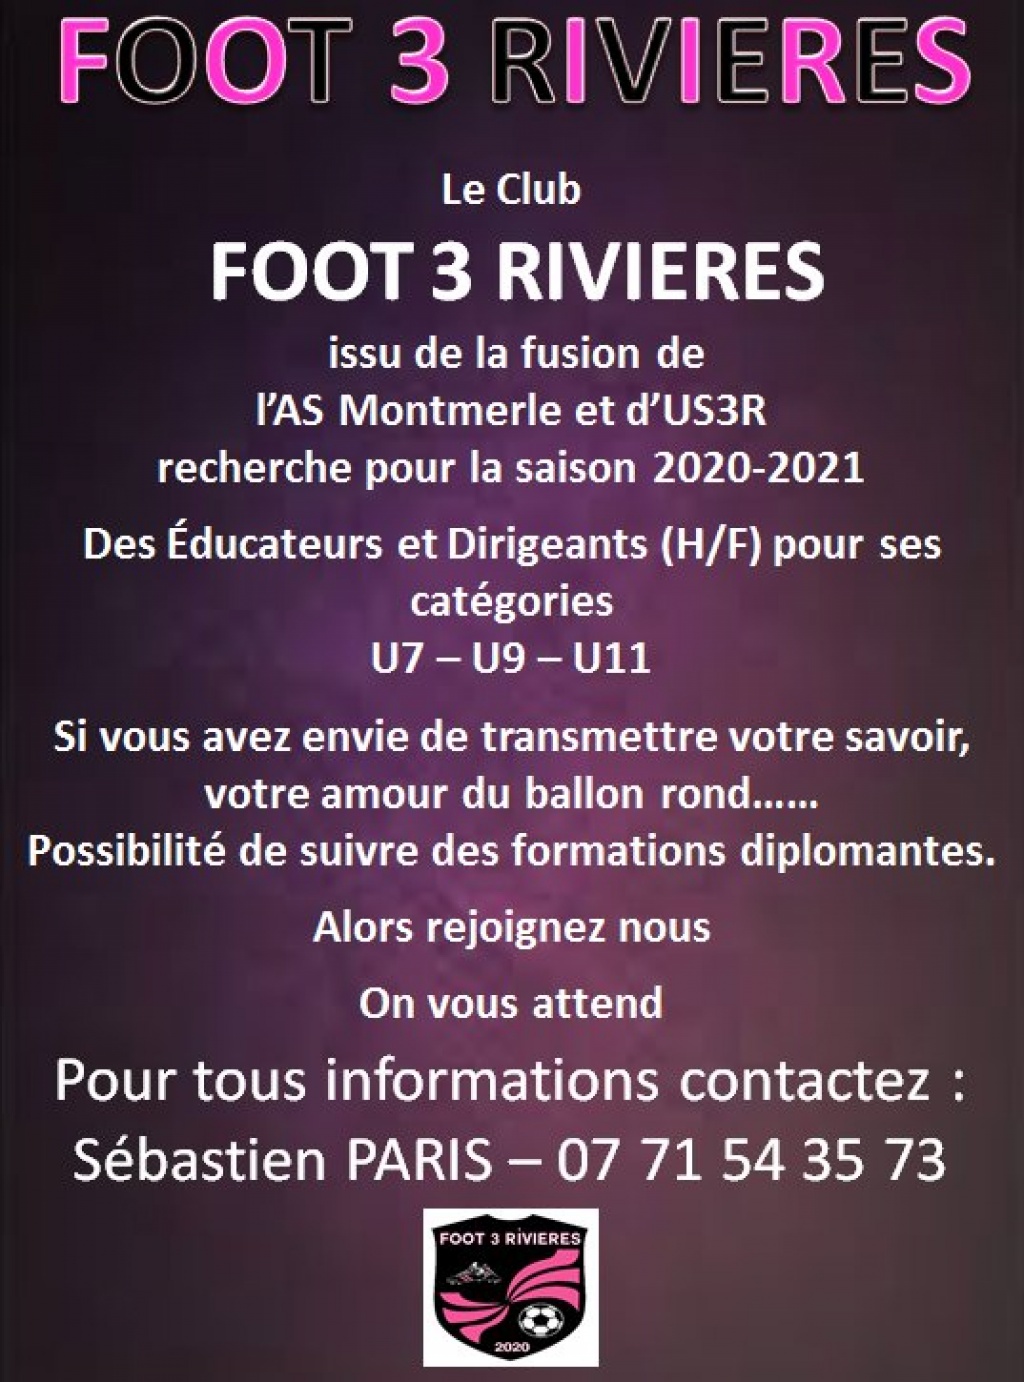 FOOT 3 RIVIERES recrute